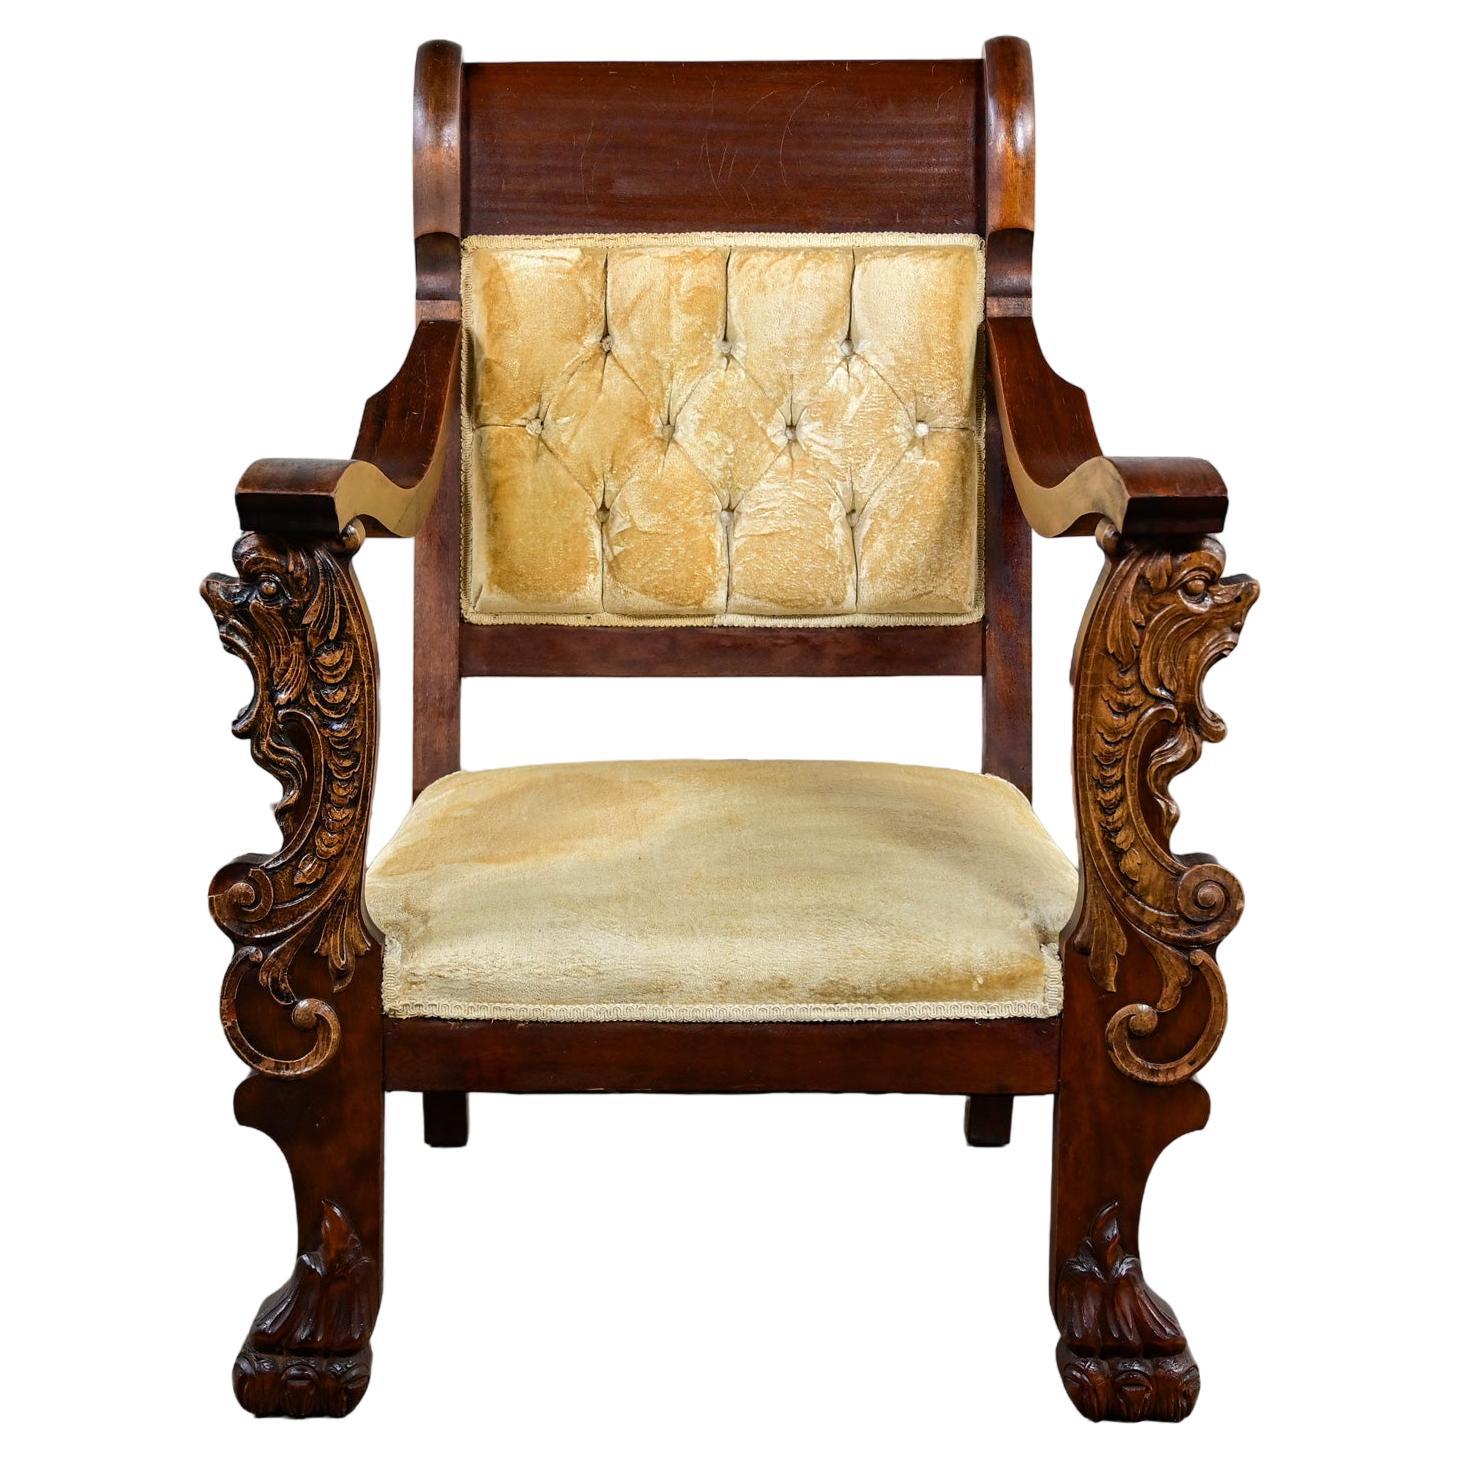 1800's Antique Victorian Mahogany Armchair Carved Figural Lion Heads & Claw Feet For Sale